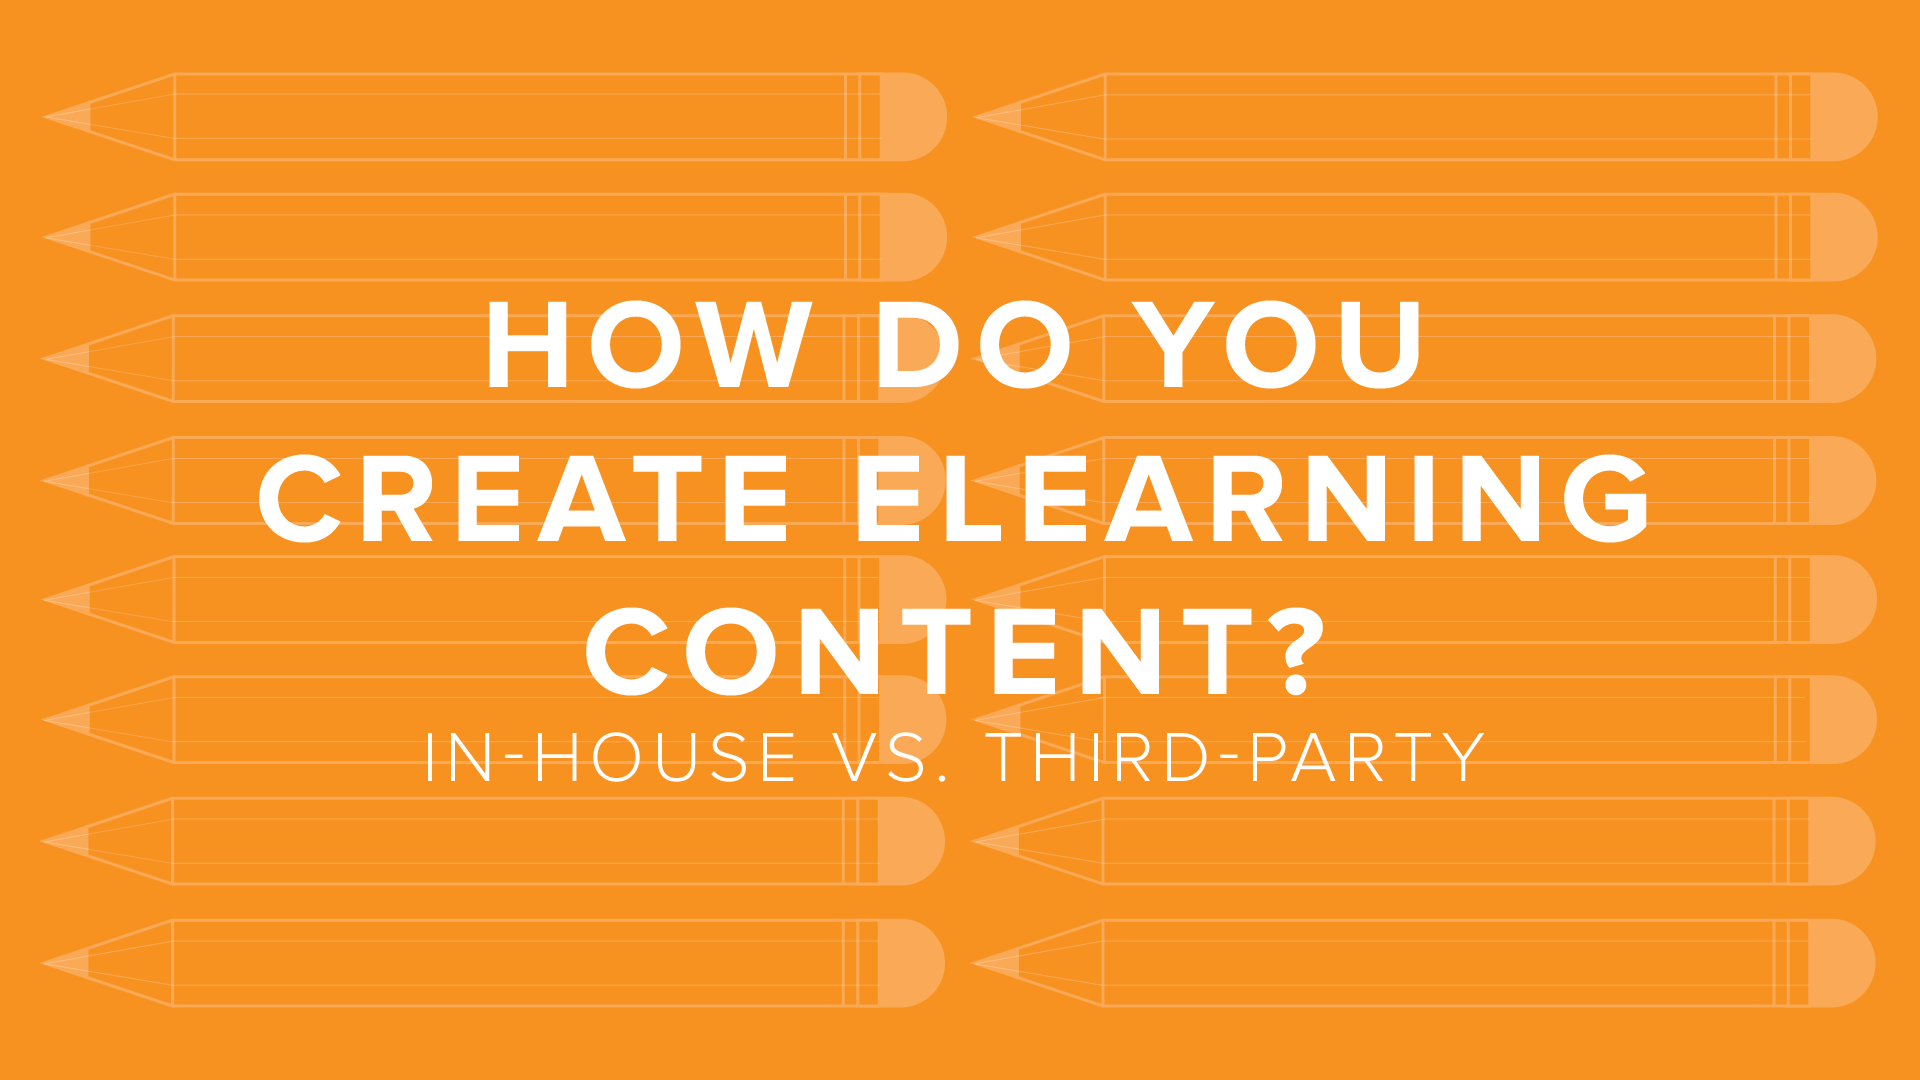 DigitalChalk: How Do You Create eLearning Content? In-House vs. Third-Party